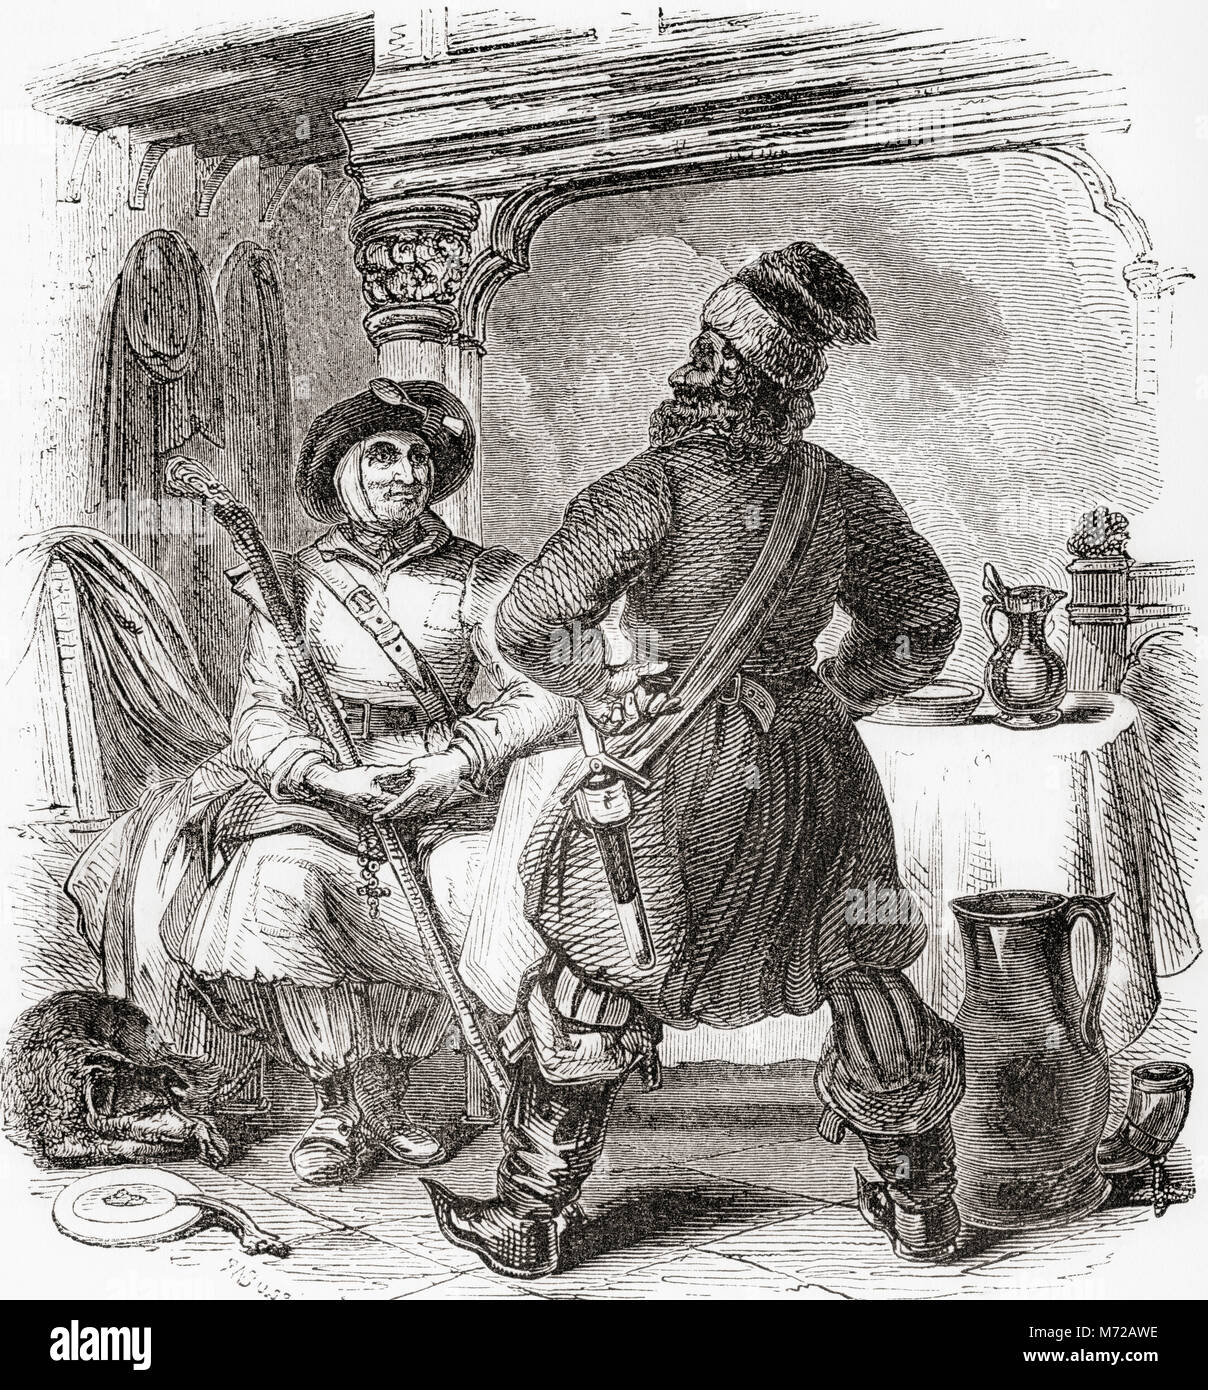 The Ploughman and Shipman.  From Old England: A Pictorial Museum, published 1847. Stock Photo